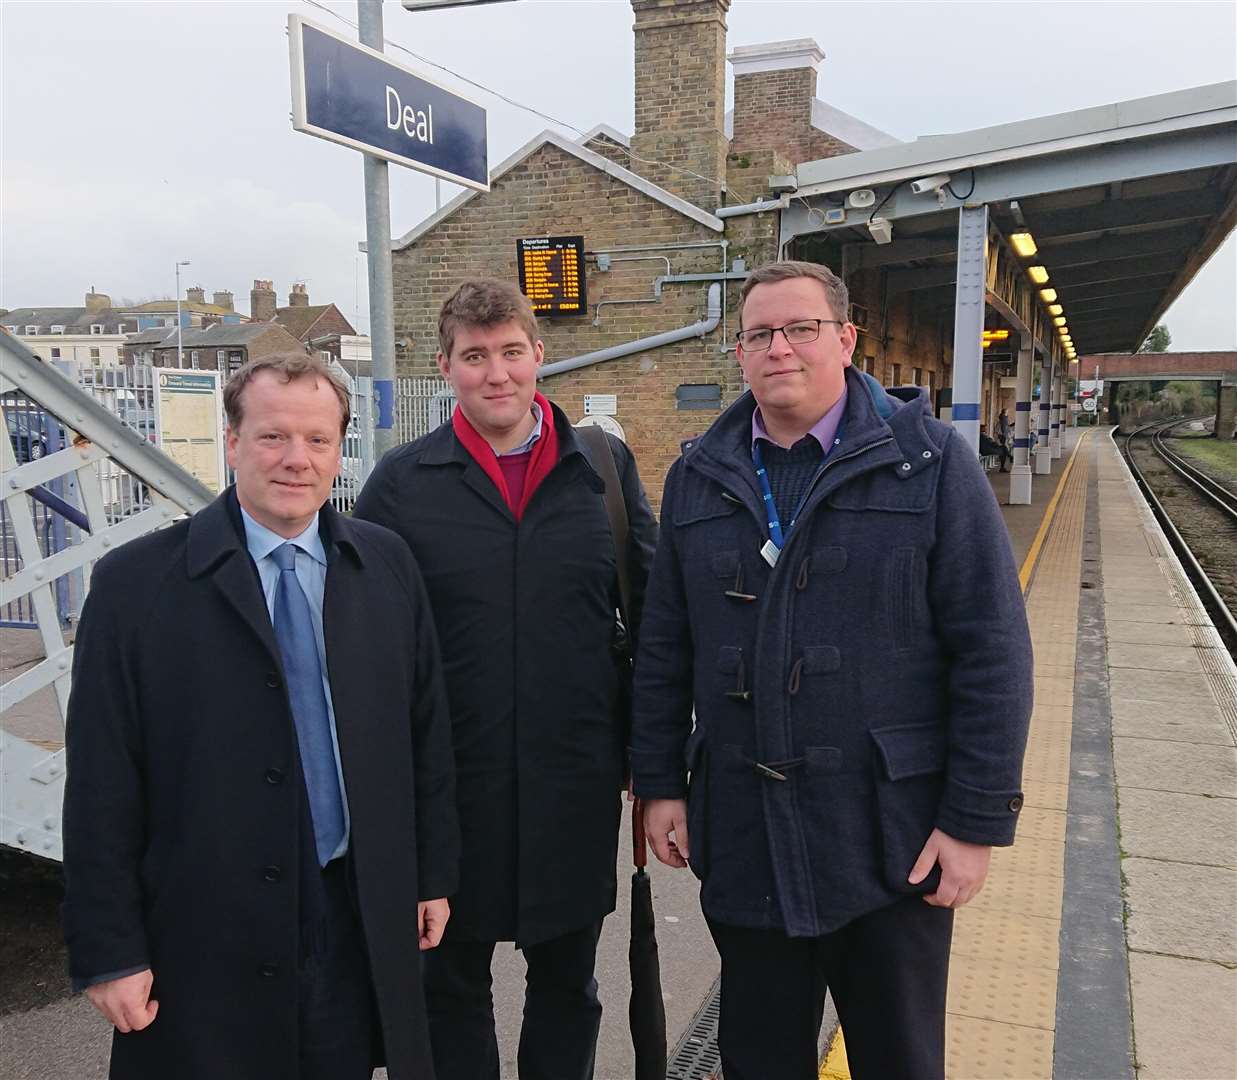 MP Charlie Elphicke with Southeastern's Chris Vinson and Deal station manager Kyle Miller